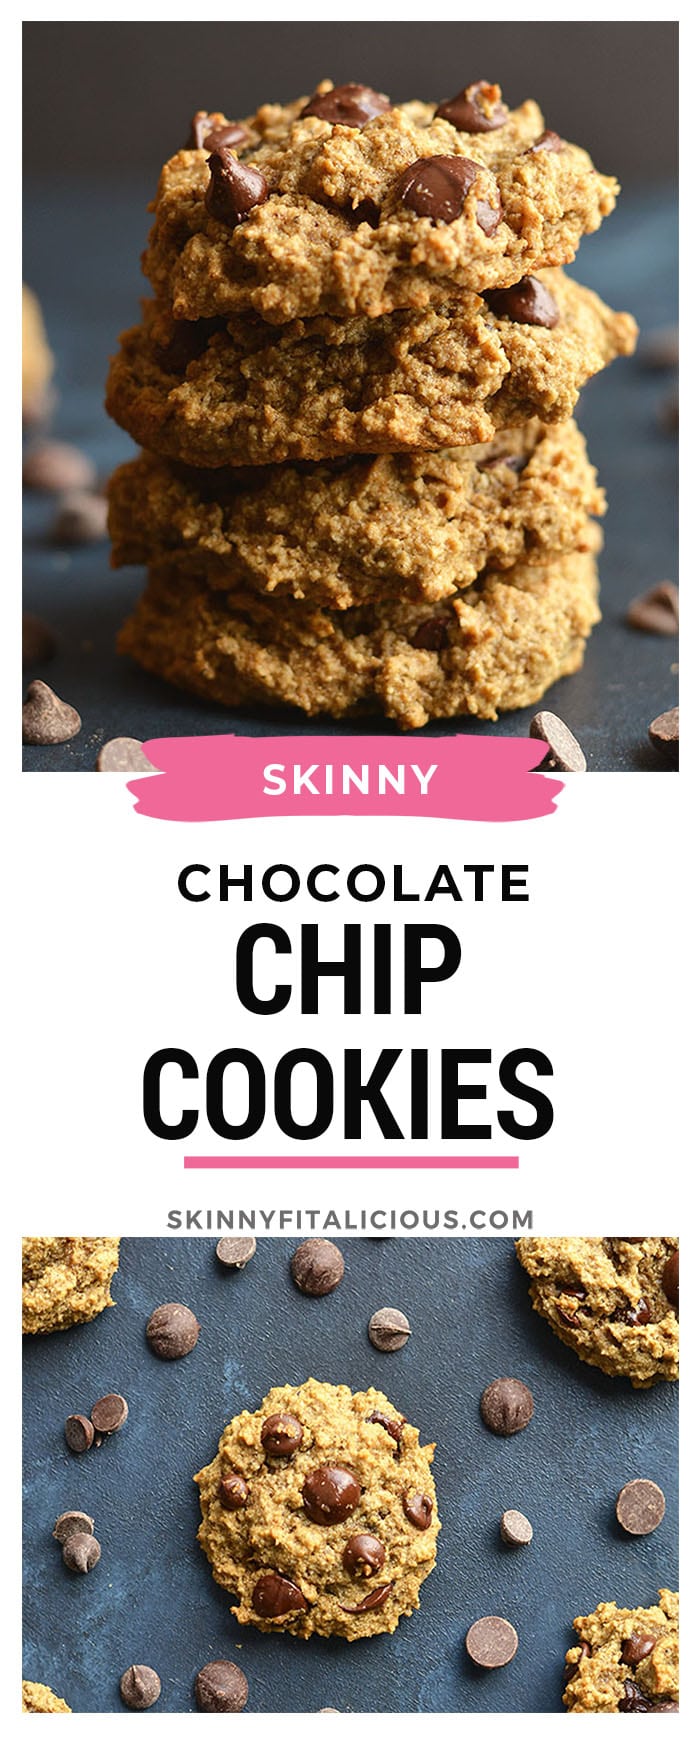 Skinny Chocolate Chip Cookies made lighter and nutritionally balanced, yet just as scrumptiously chewy and delicious as the original recipe. Perfect for healthy snacking! Vegan + Gluten Free + Low Calorie